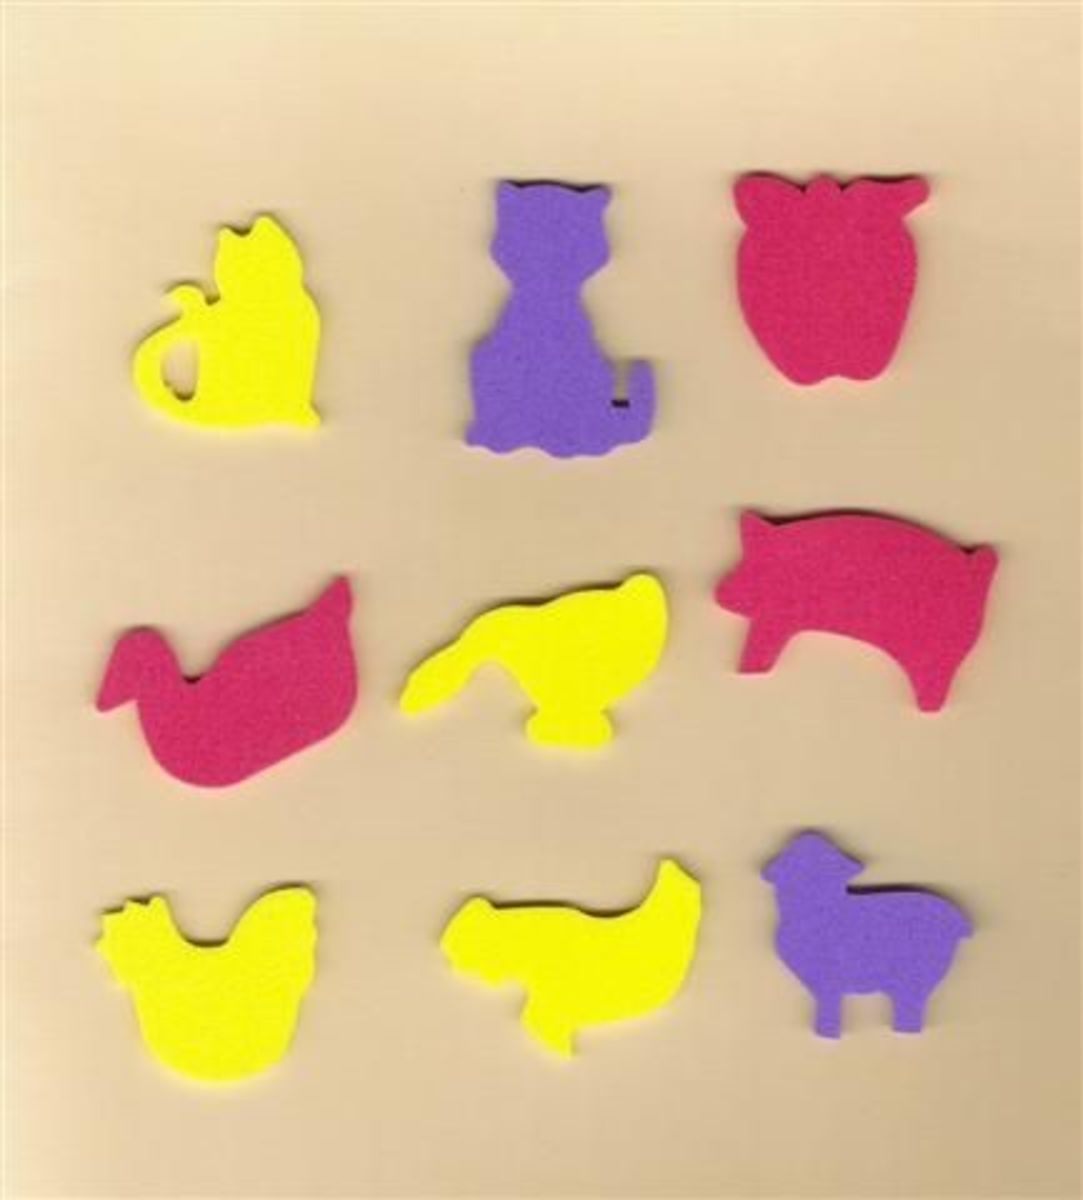 These inexpensive precut foam shapes come in kits and packs.